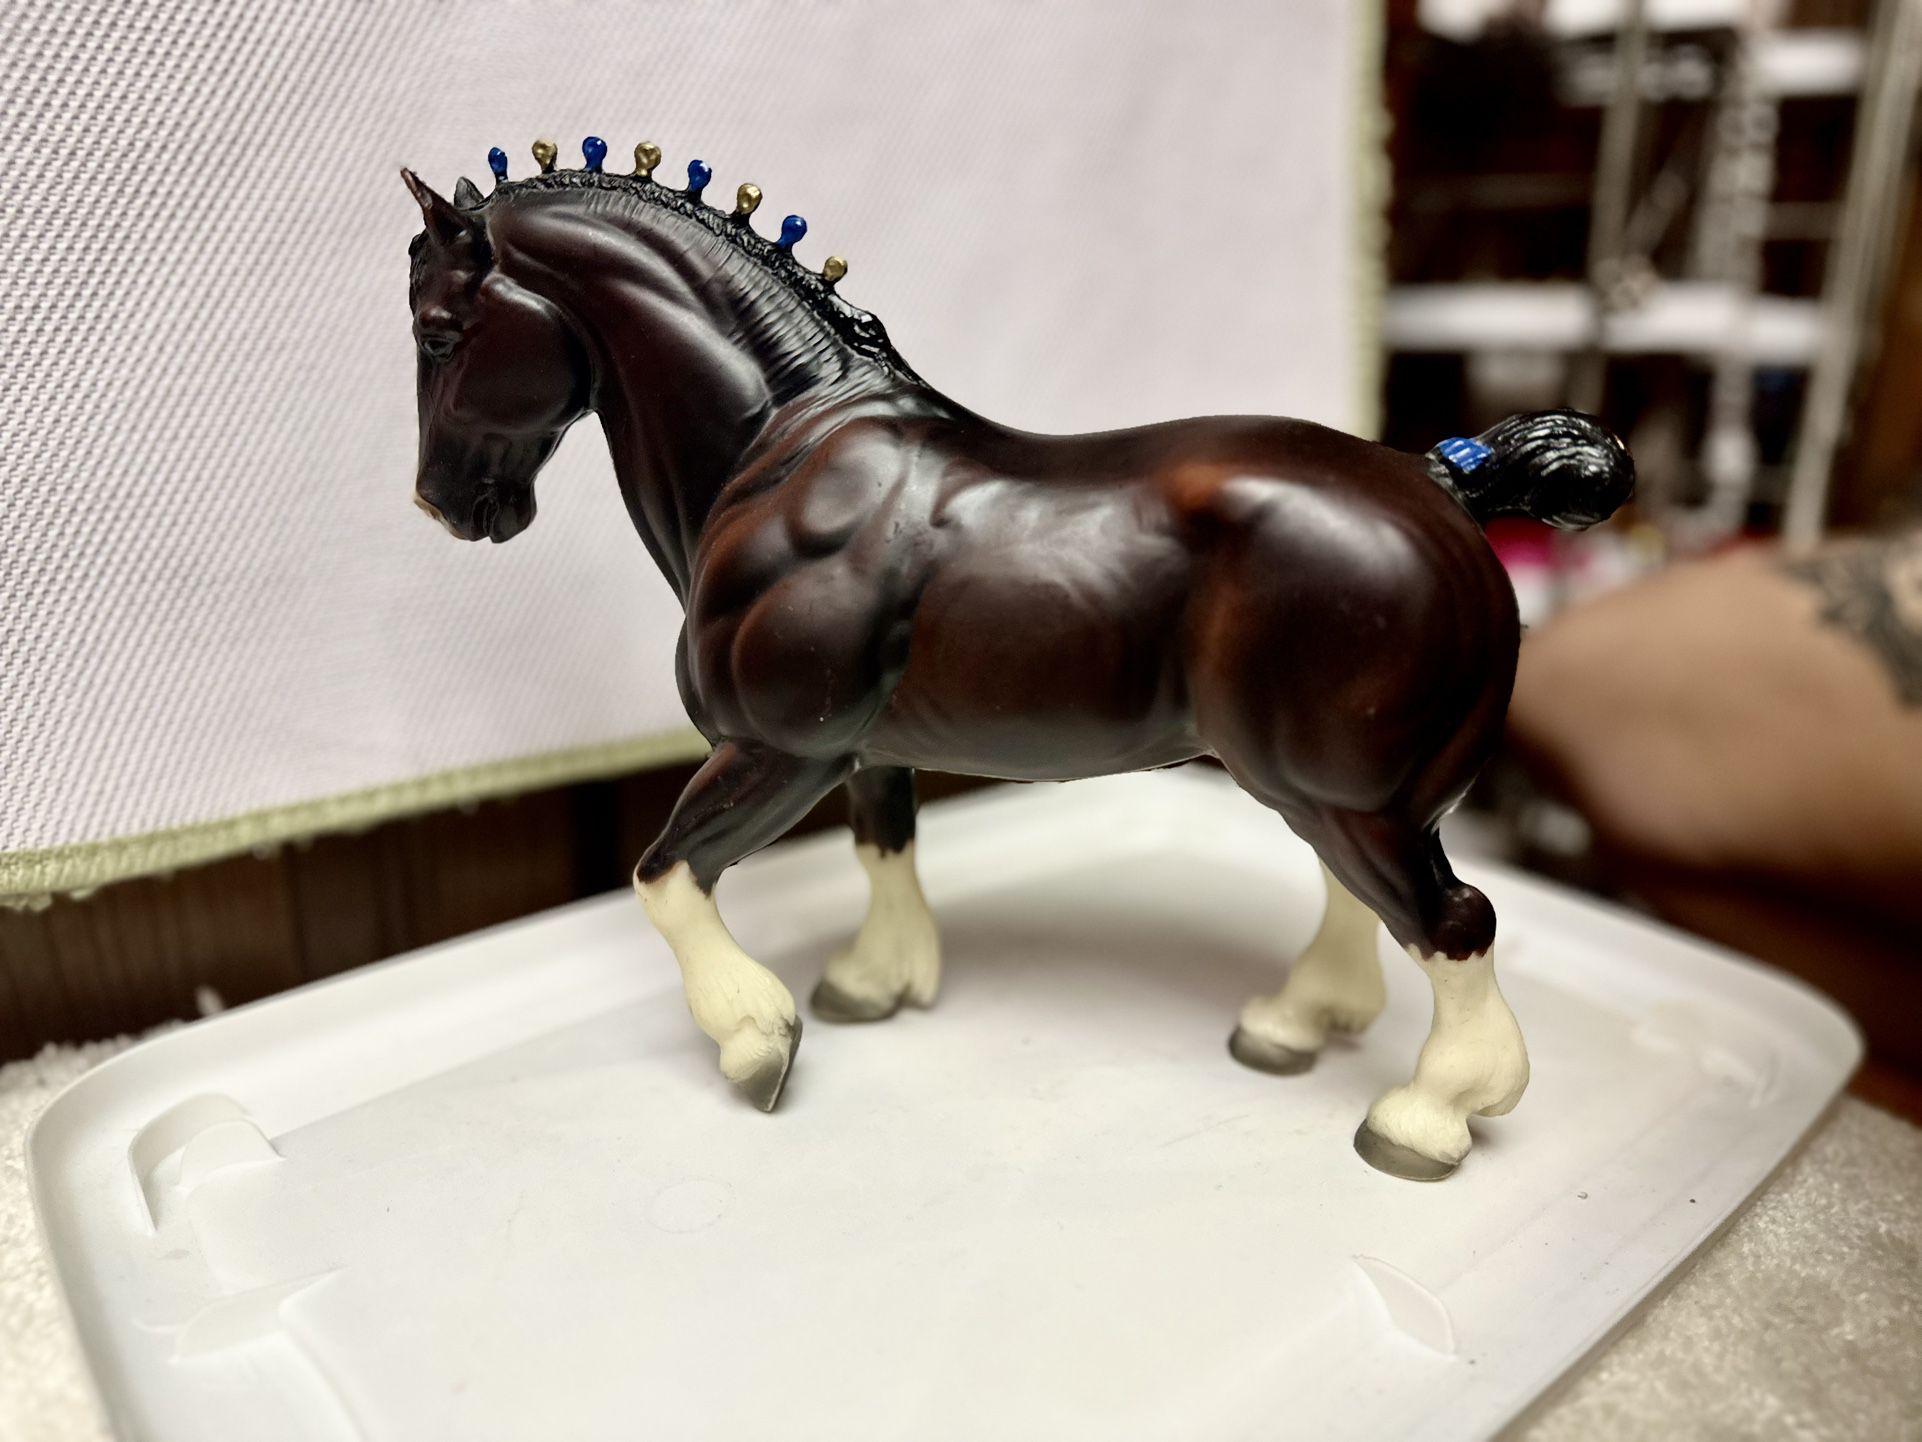 Breyer Traditional Clydesdale Stallion #738 Produced 1(contact info removed)